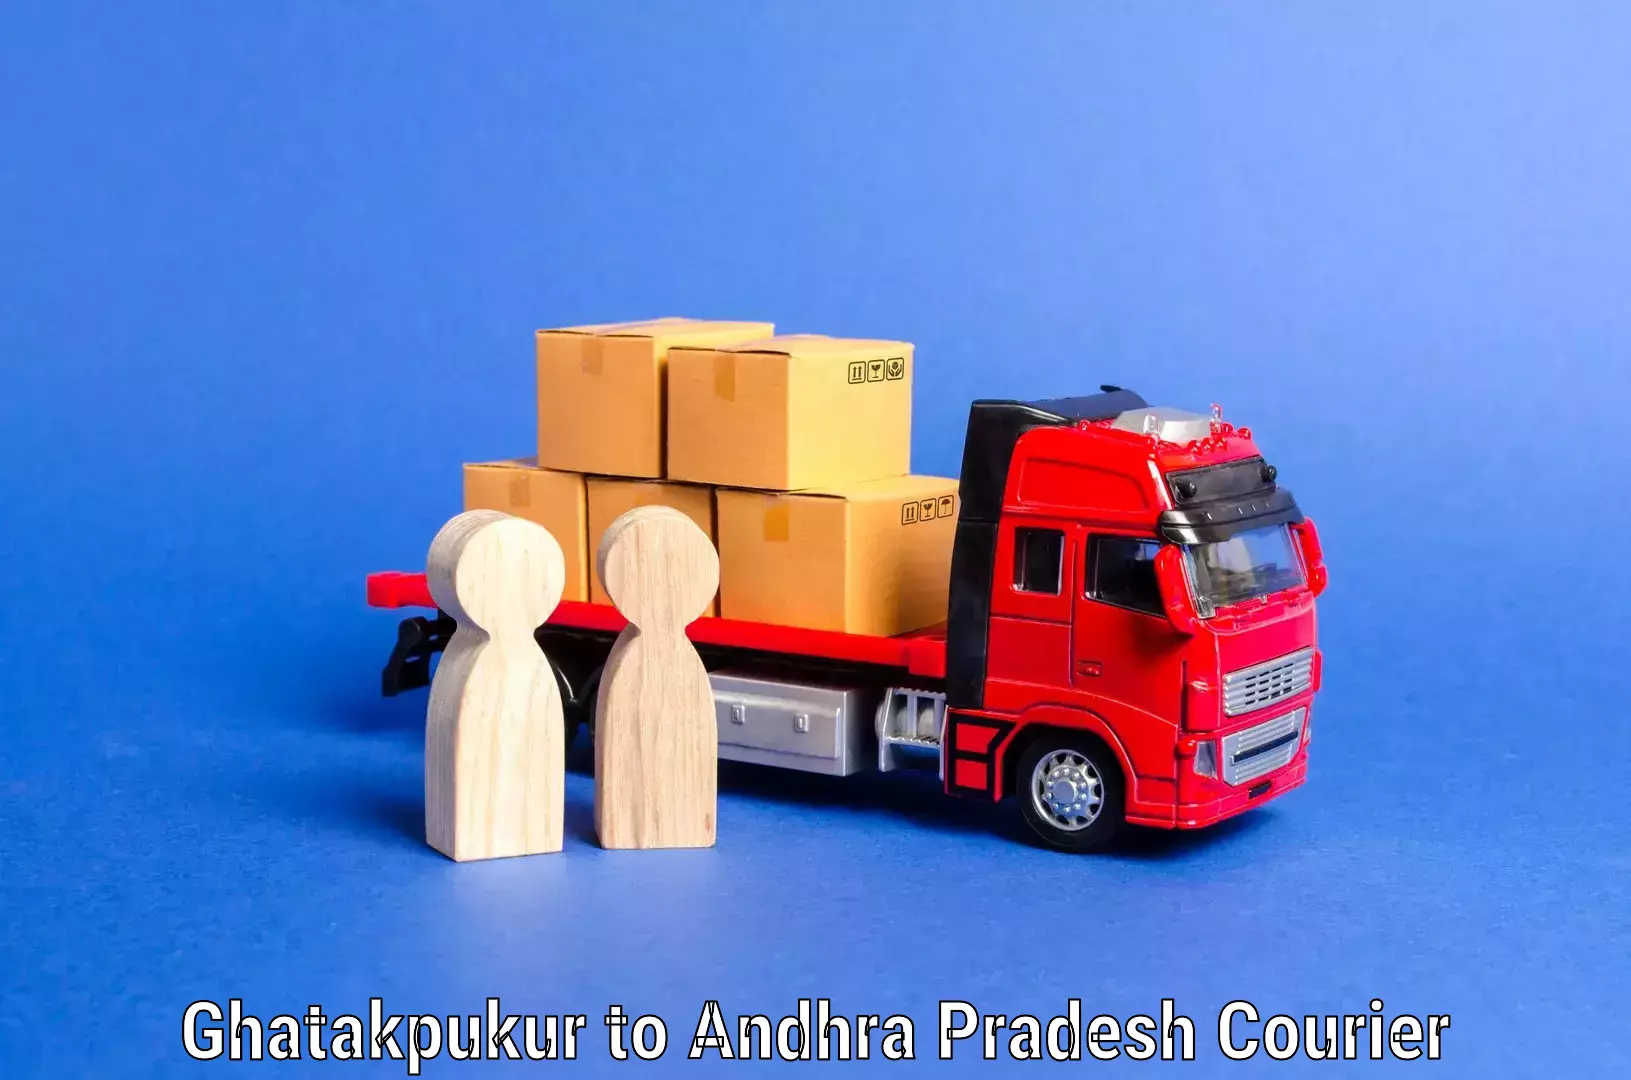 Quality relocation assistance Ghatakpukur to Andhra Pradesh